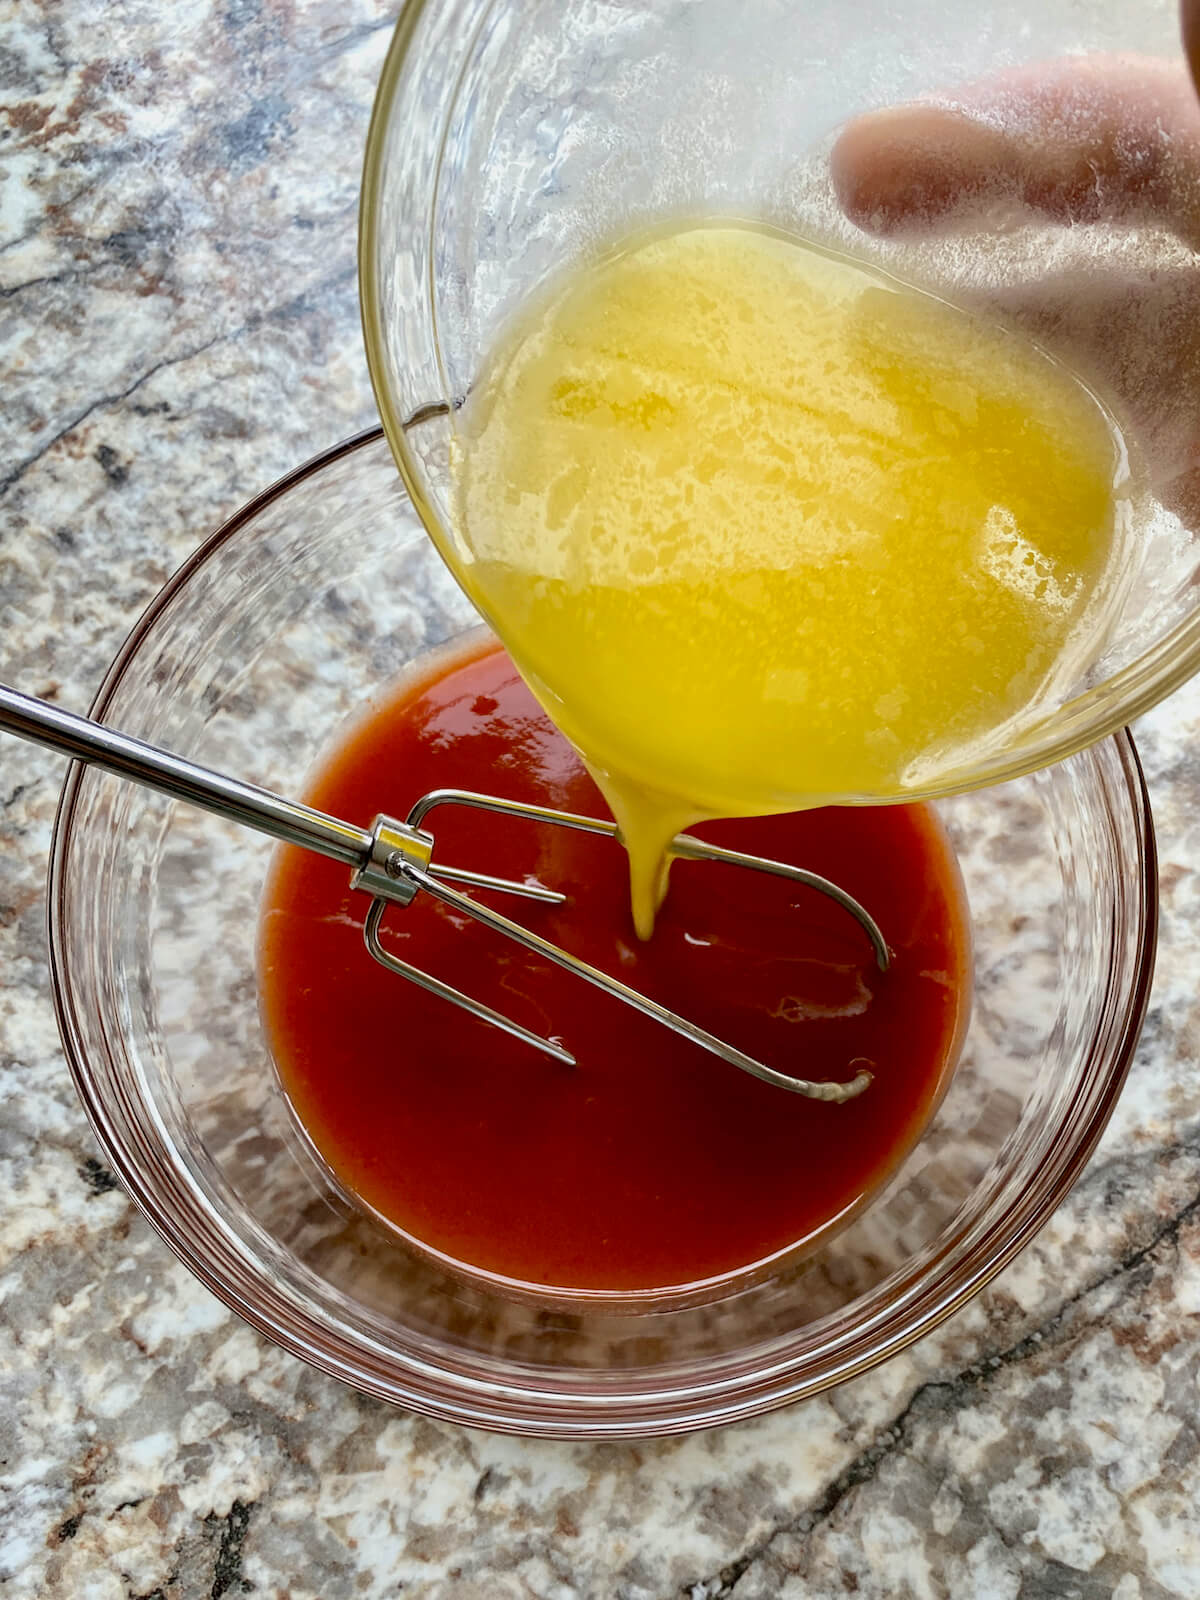 A small bowl of melted butter being poured into a slightly large bowl of cayenne pepper hot sauce. There is a small whisk in the bowl of hot sauce.